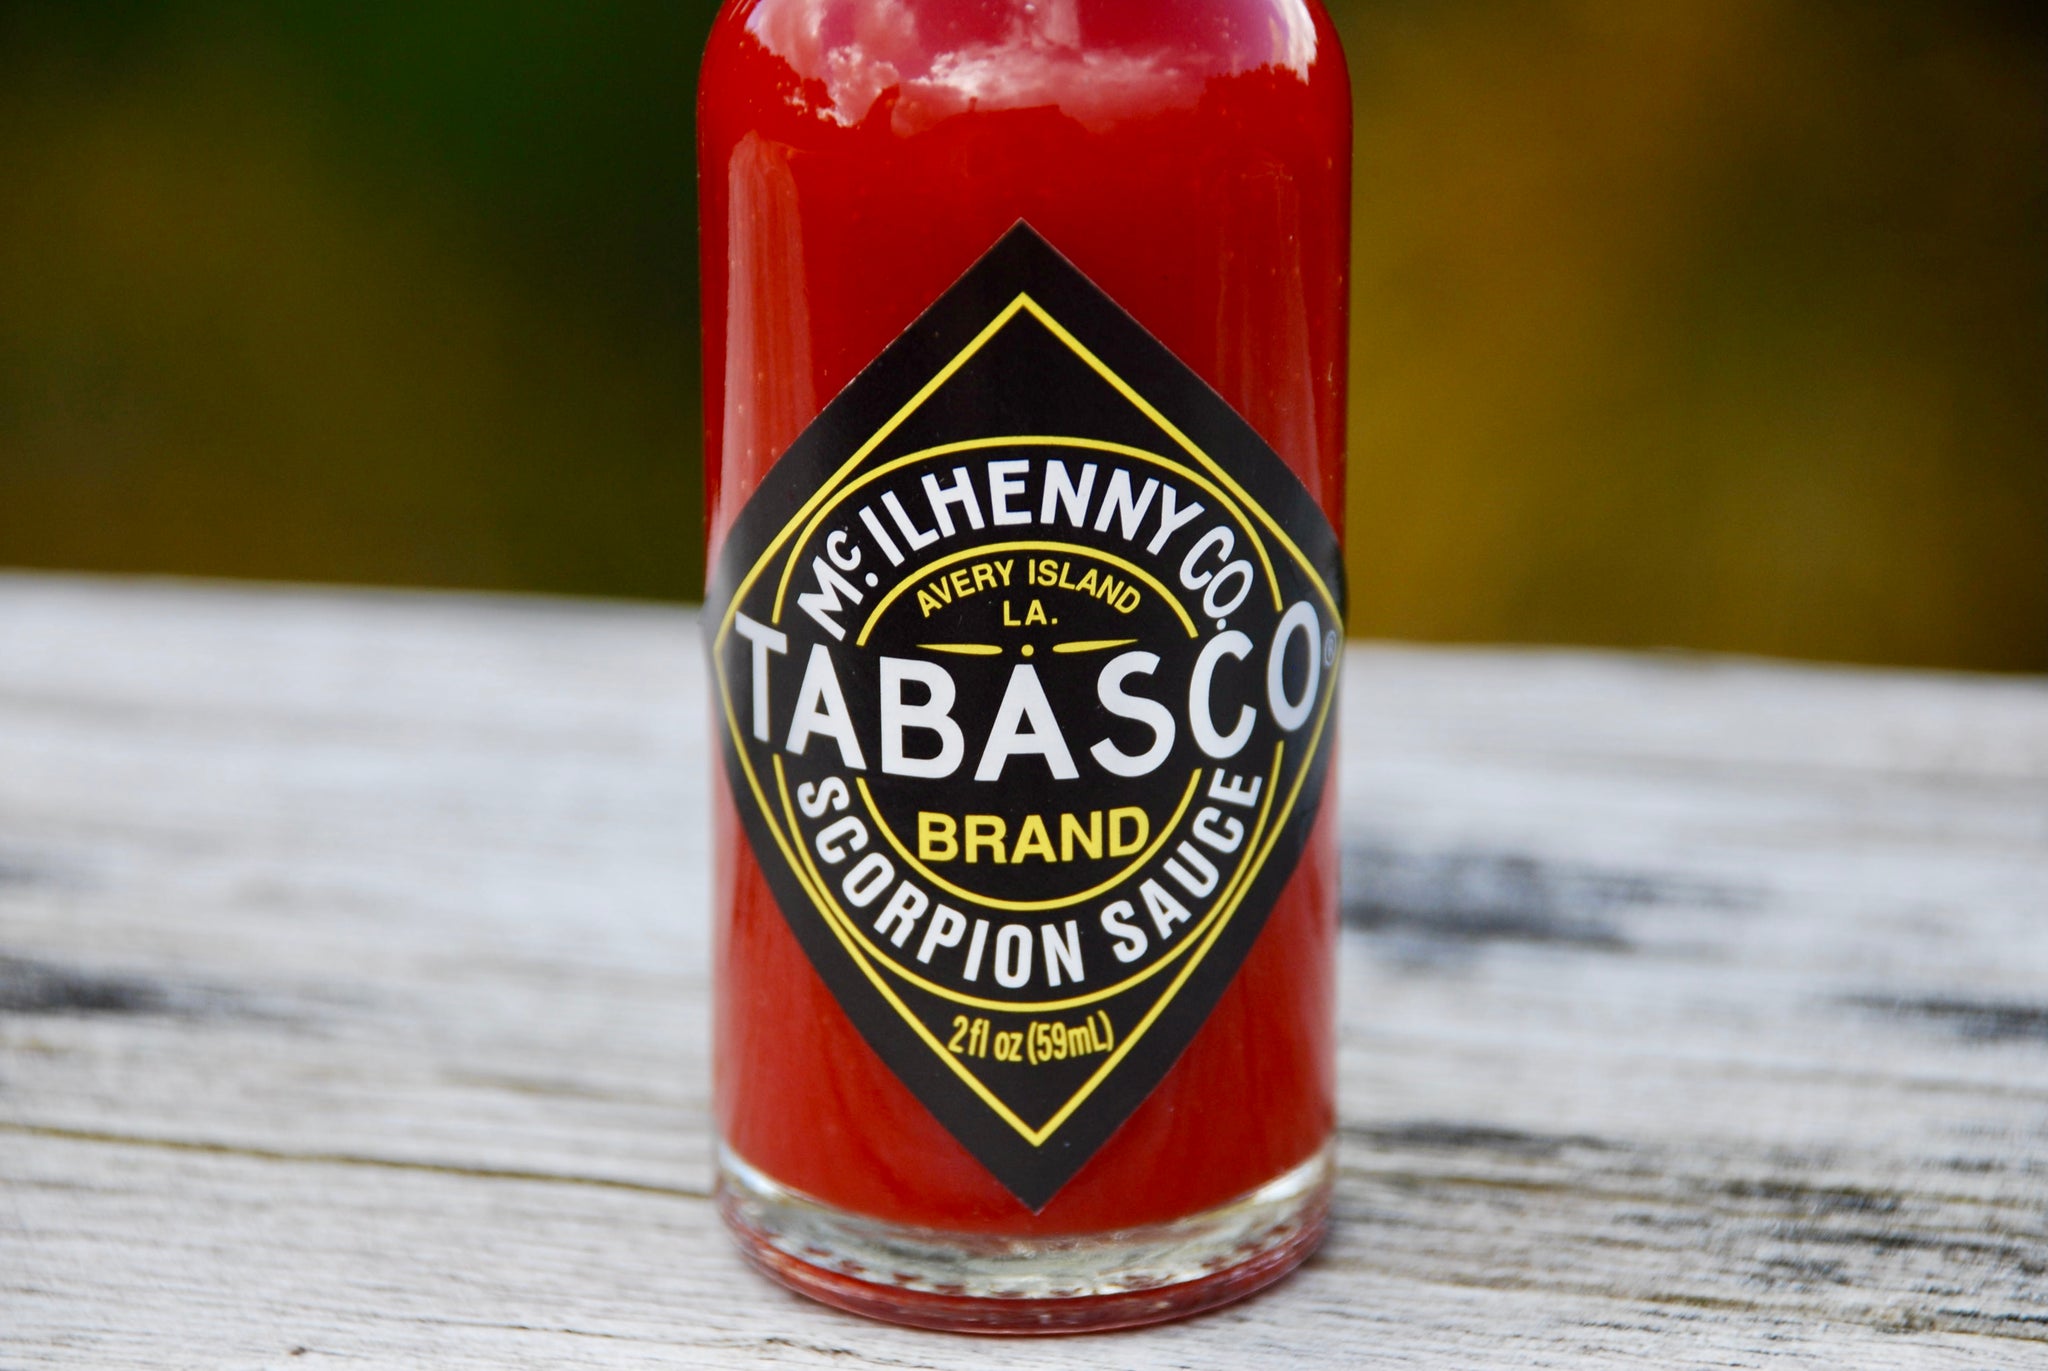 Tabasco has released a new 'Scorpion Sauce' which is TWENTY TIMES